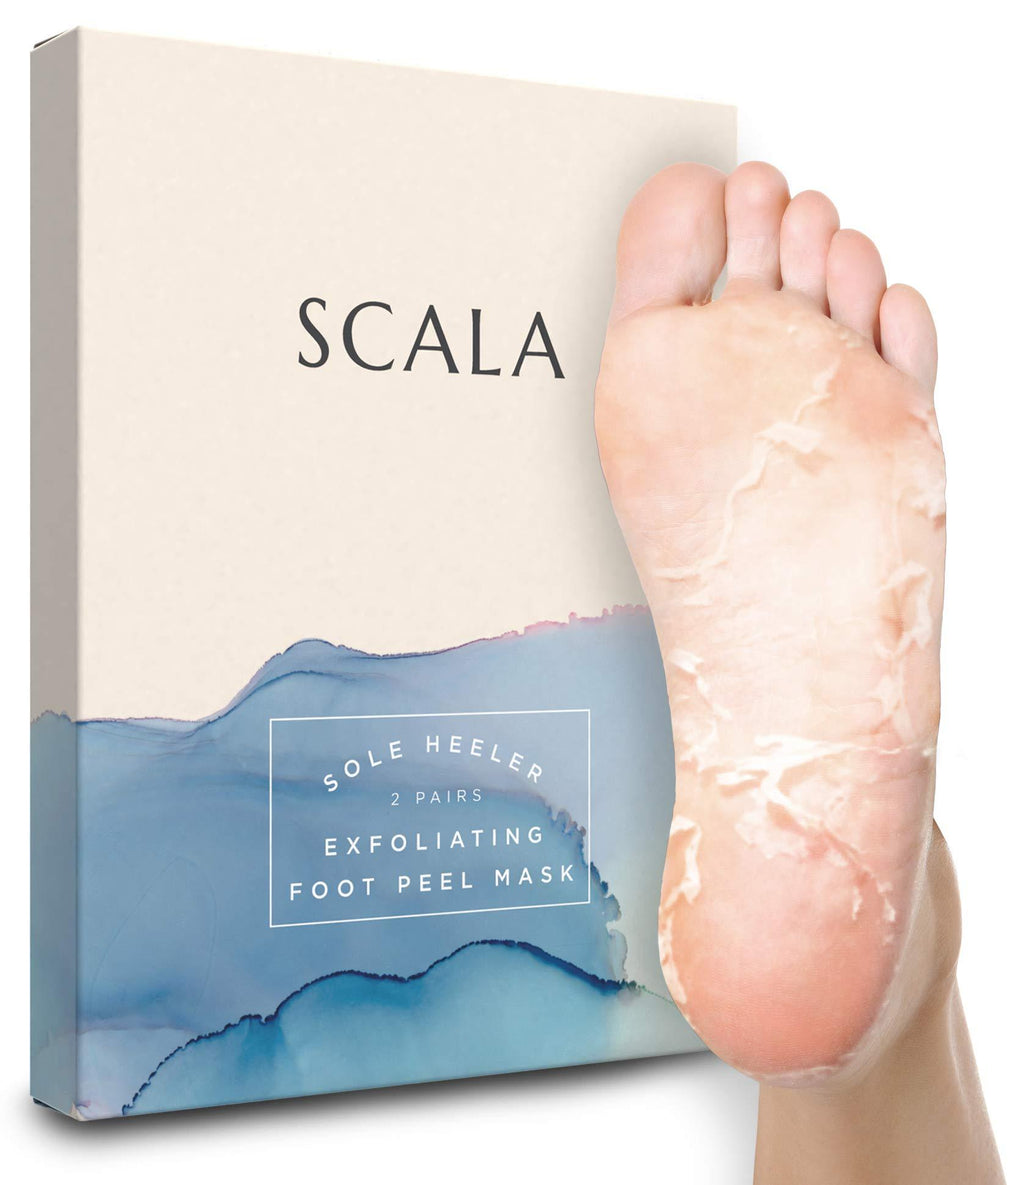 Foot Peel Exfoliating Mask (2 pack) - Deep Skin Exfoliation for Dry Cracked Feet, Calluses, and Rough Heels for Men & Women. Get Baby-Soft and Smooth Feet with Scala Foot Peel Mask - BeesActive Australia